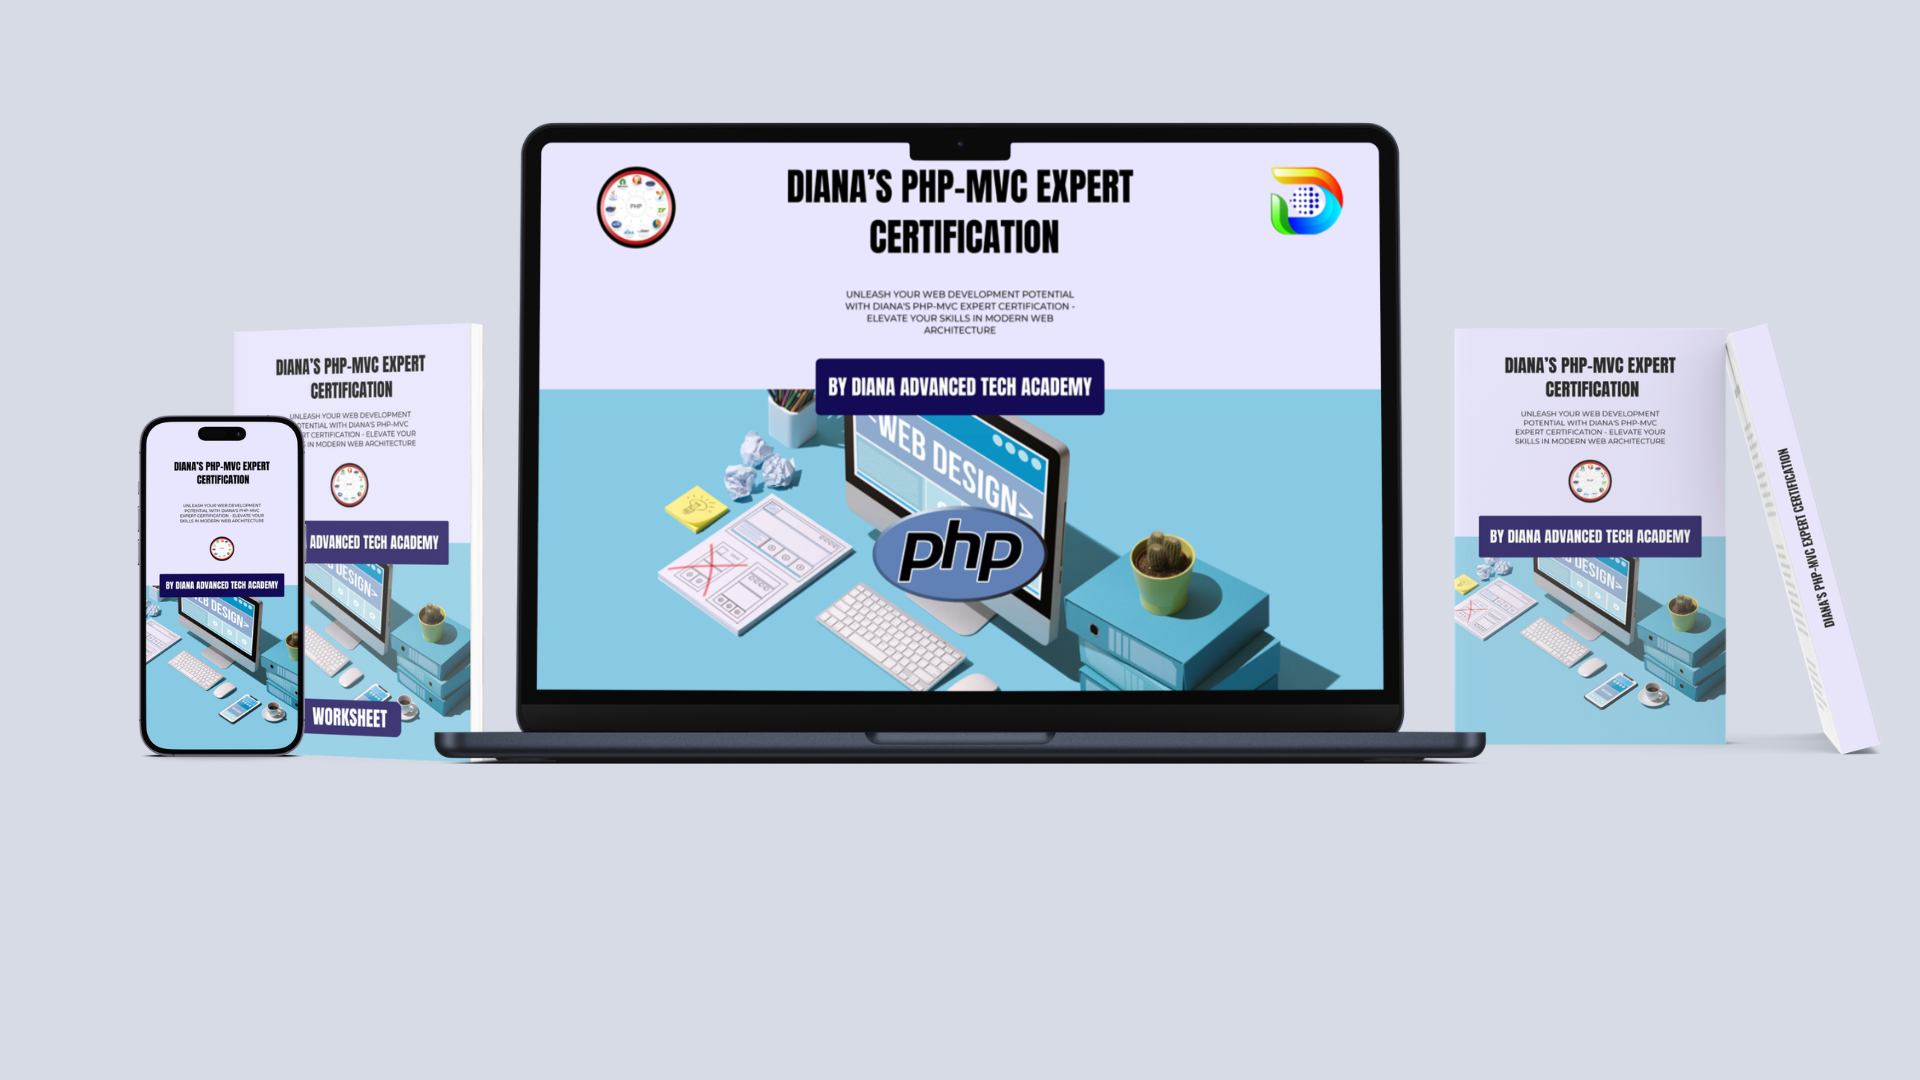 Diana’s PHP-MVC Expert Certification